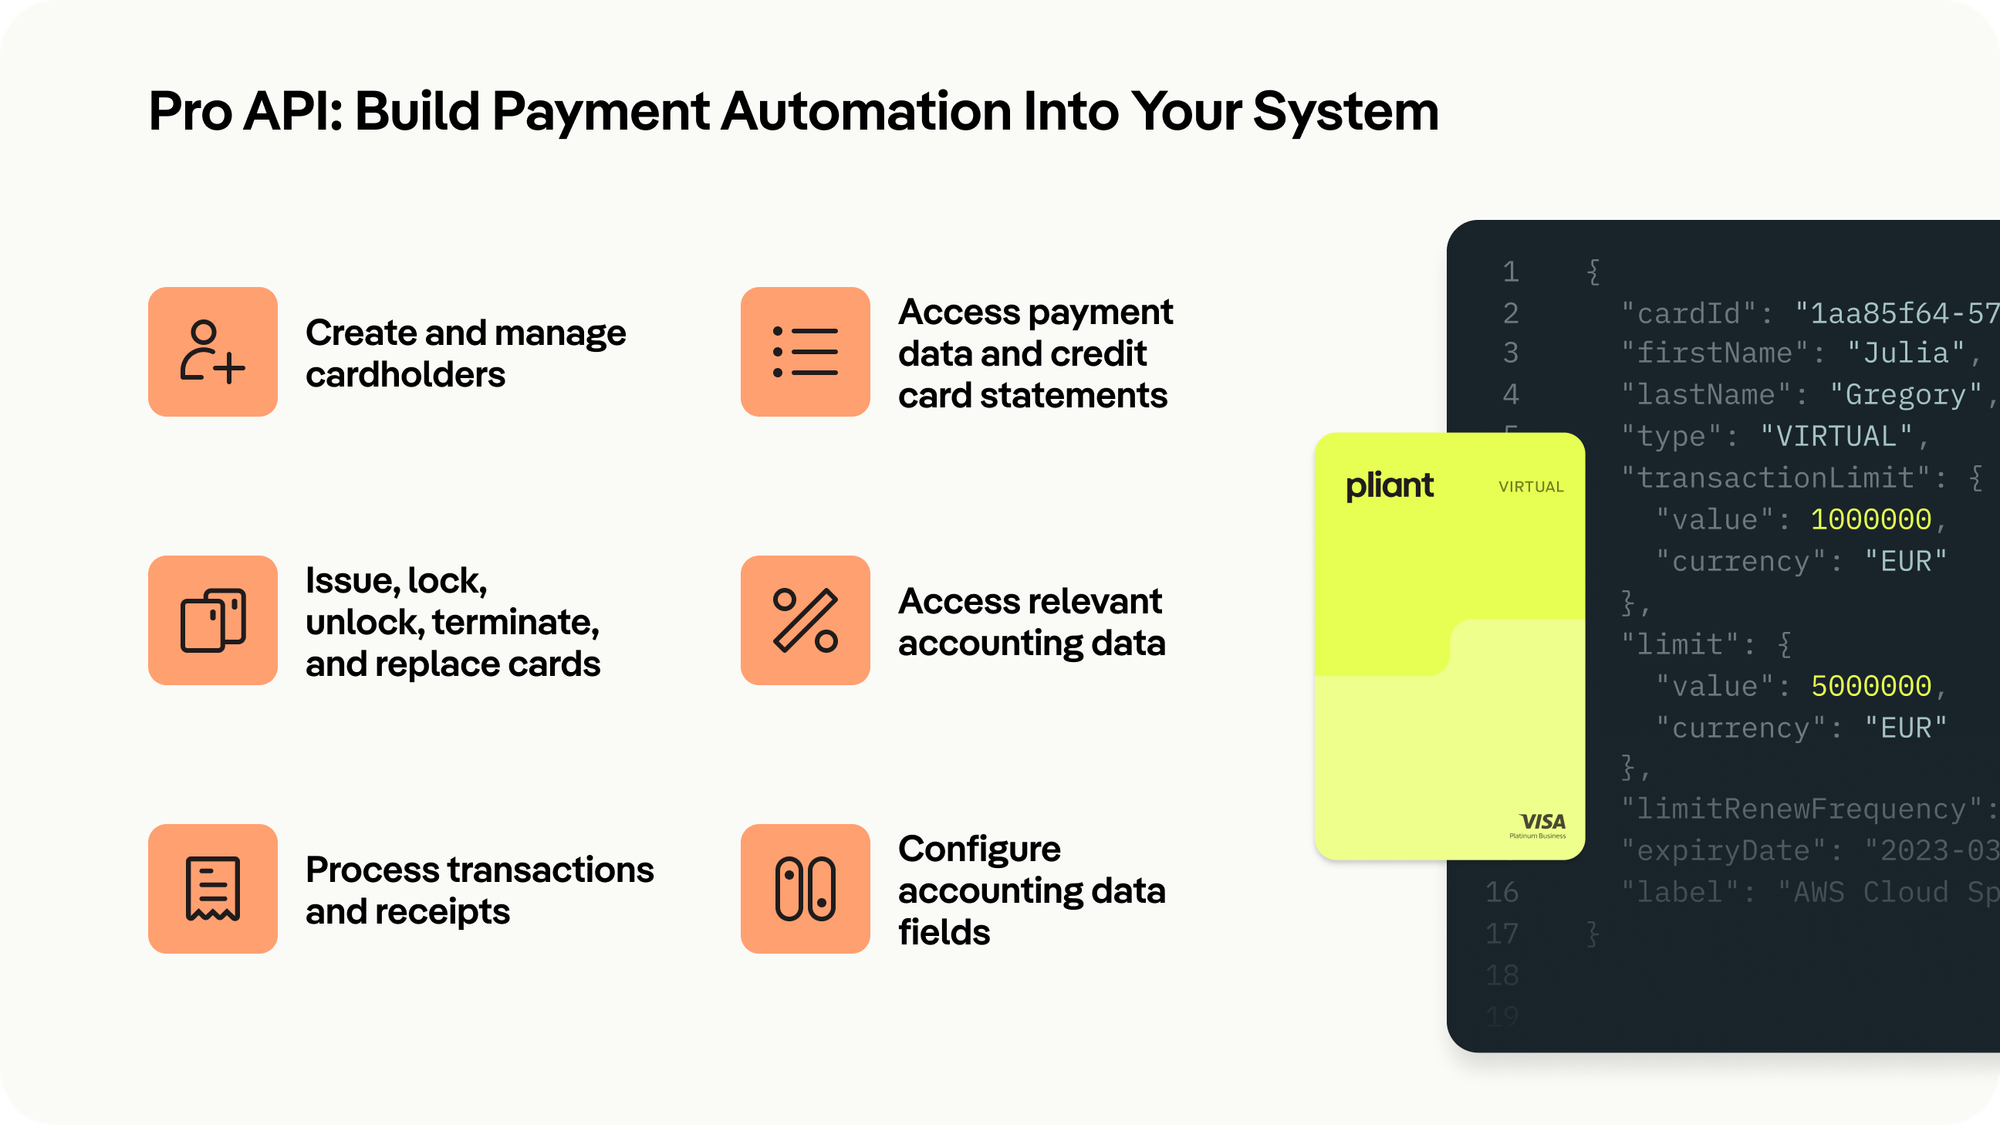 Building Payment Automation into Travel Purchasing Systems